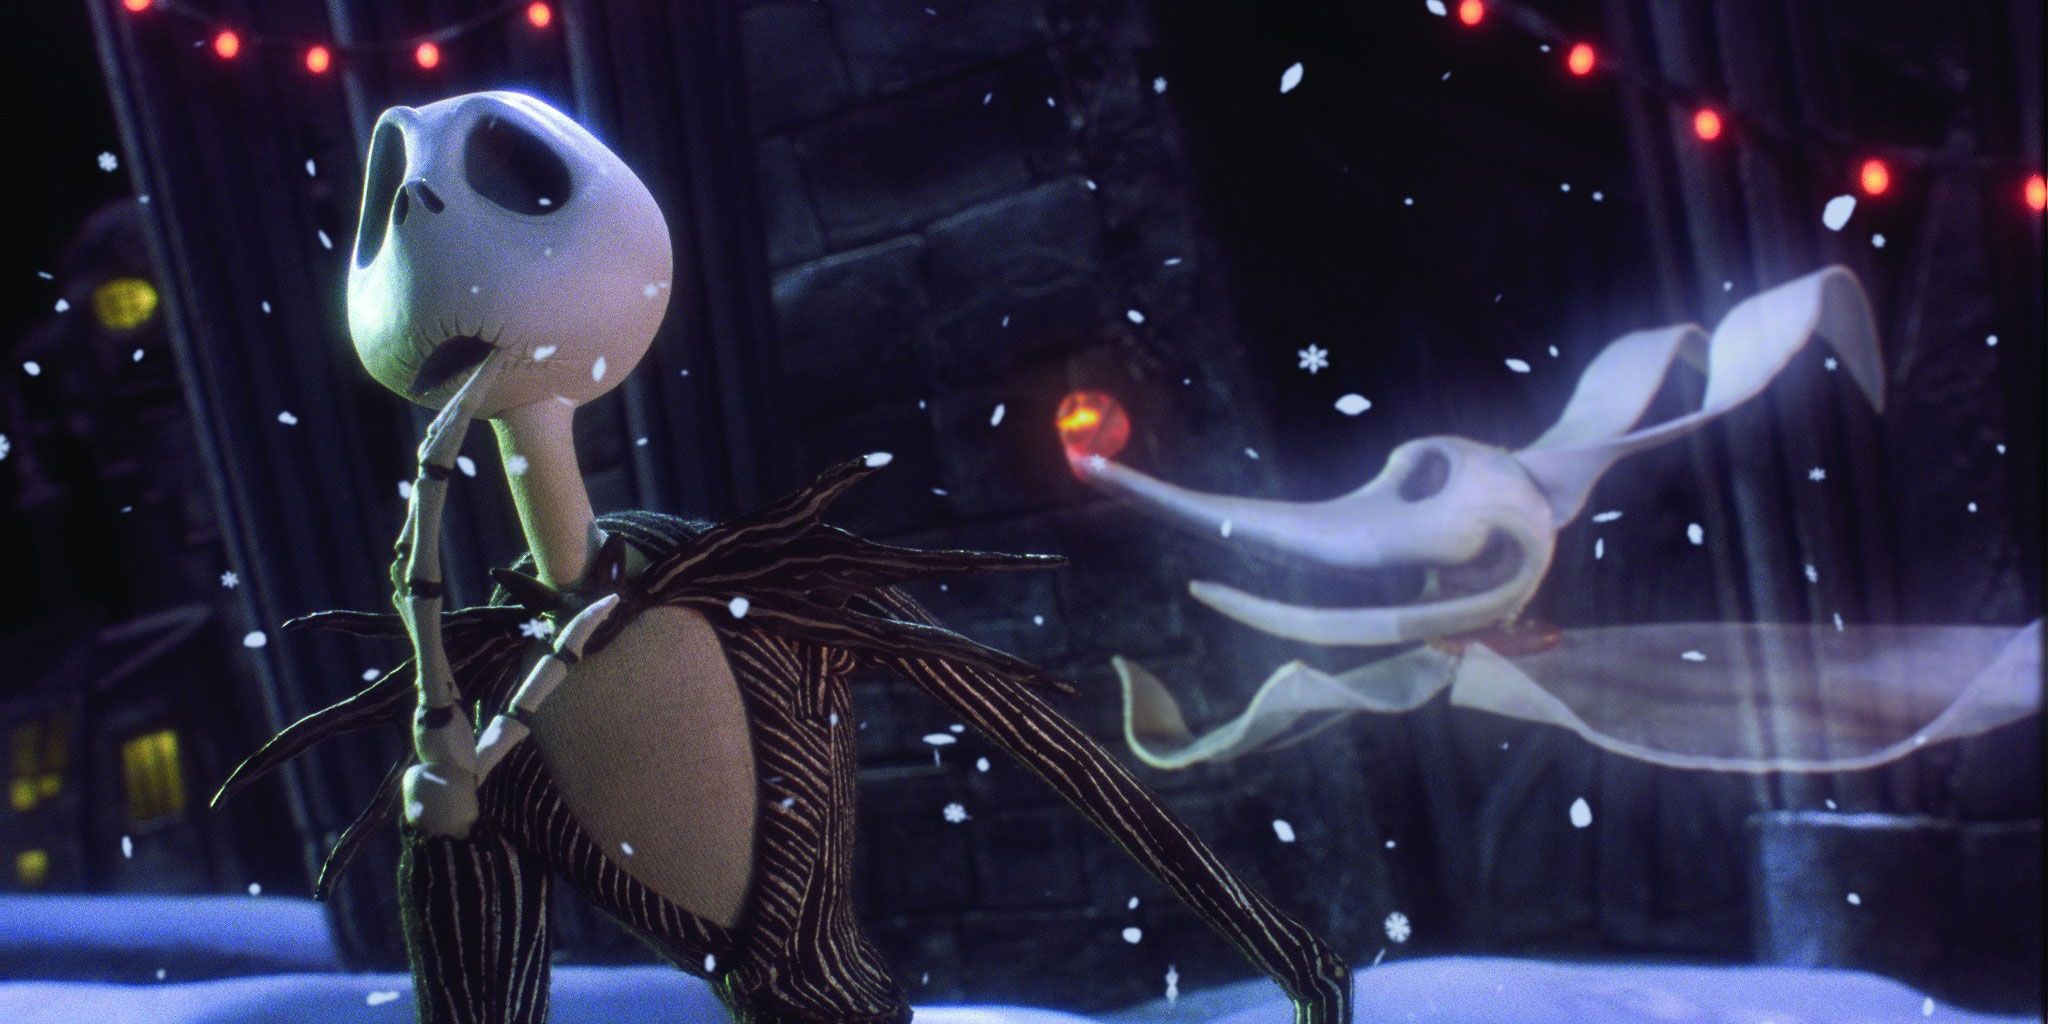 What's This: 20 Things Fans Don't Know About The Nightmare Before